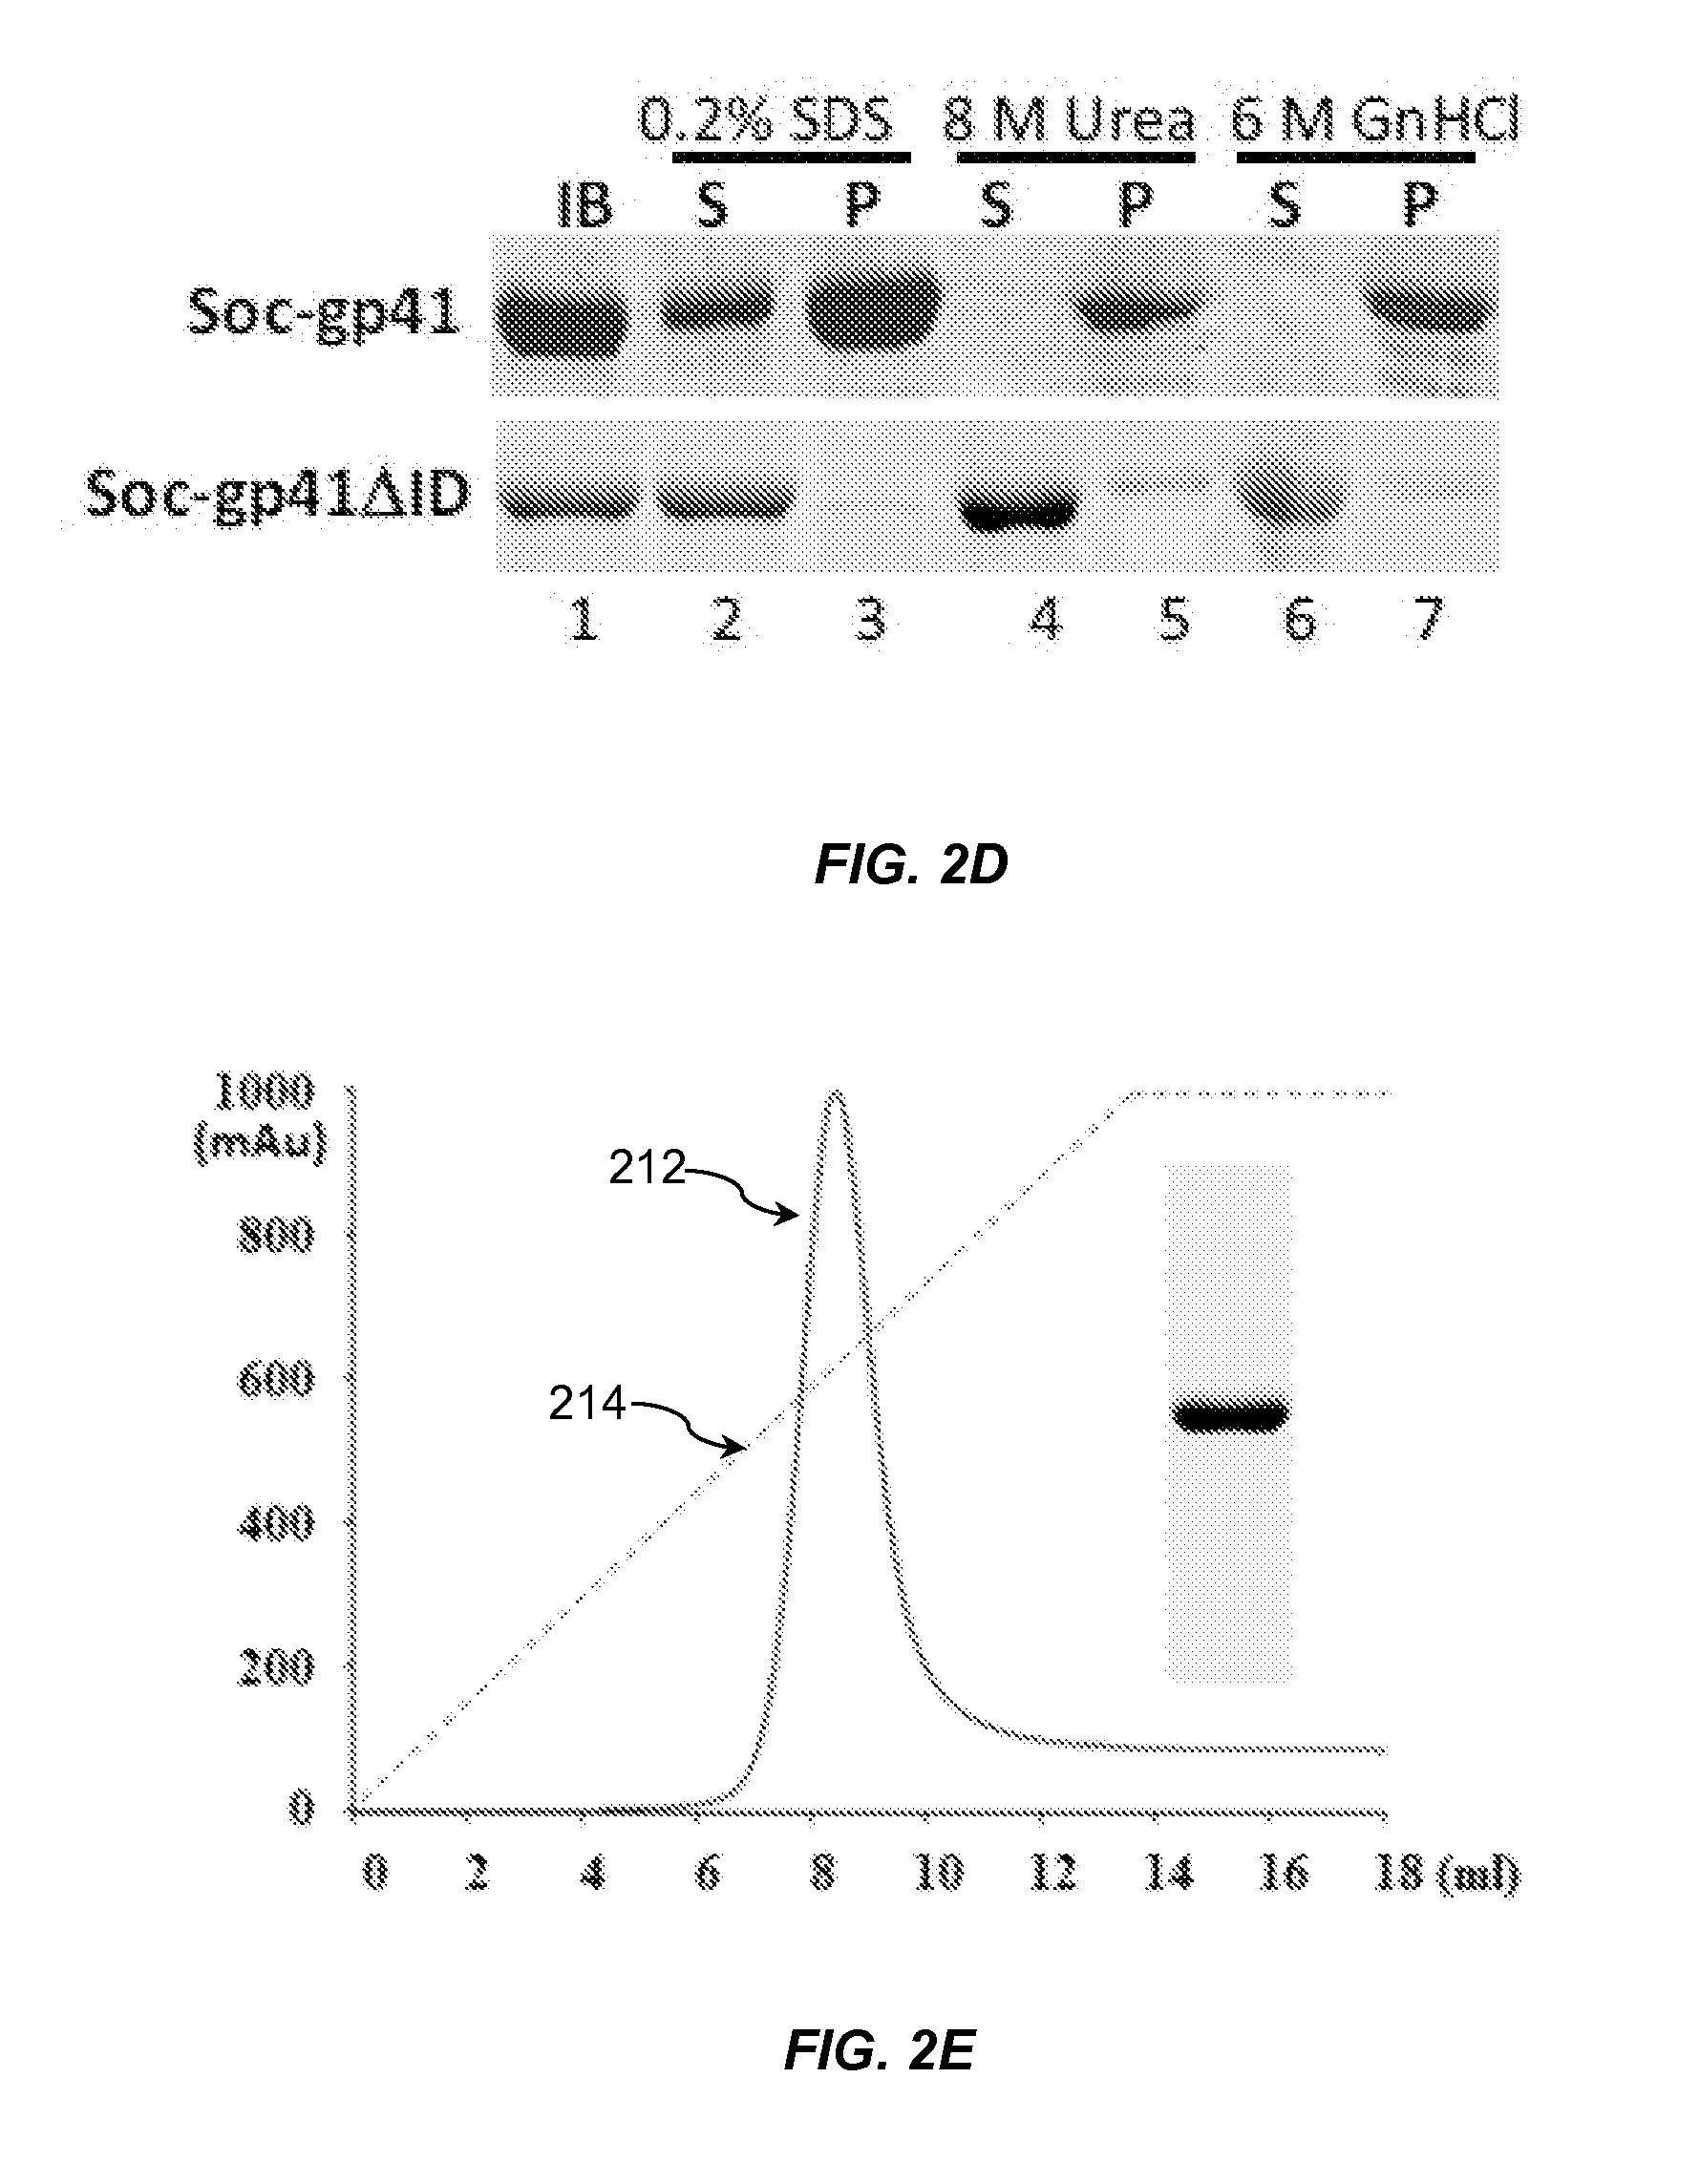 Designing a soluble full-length HIV-1 GP41 trimer